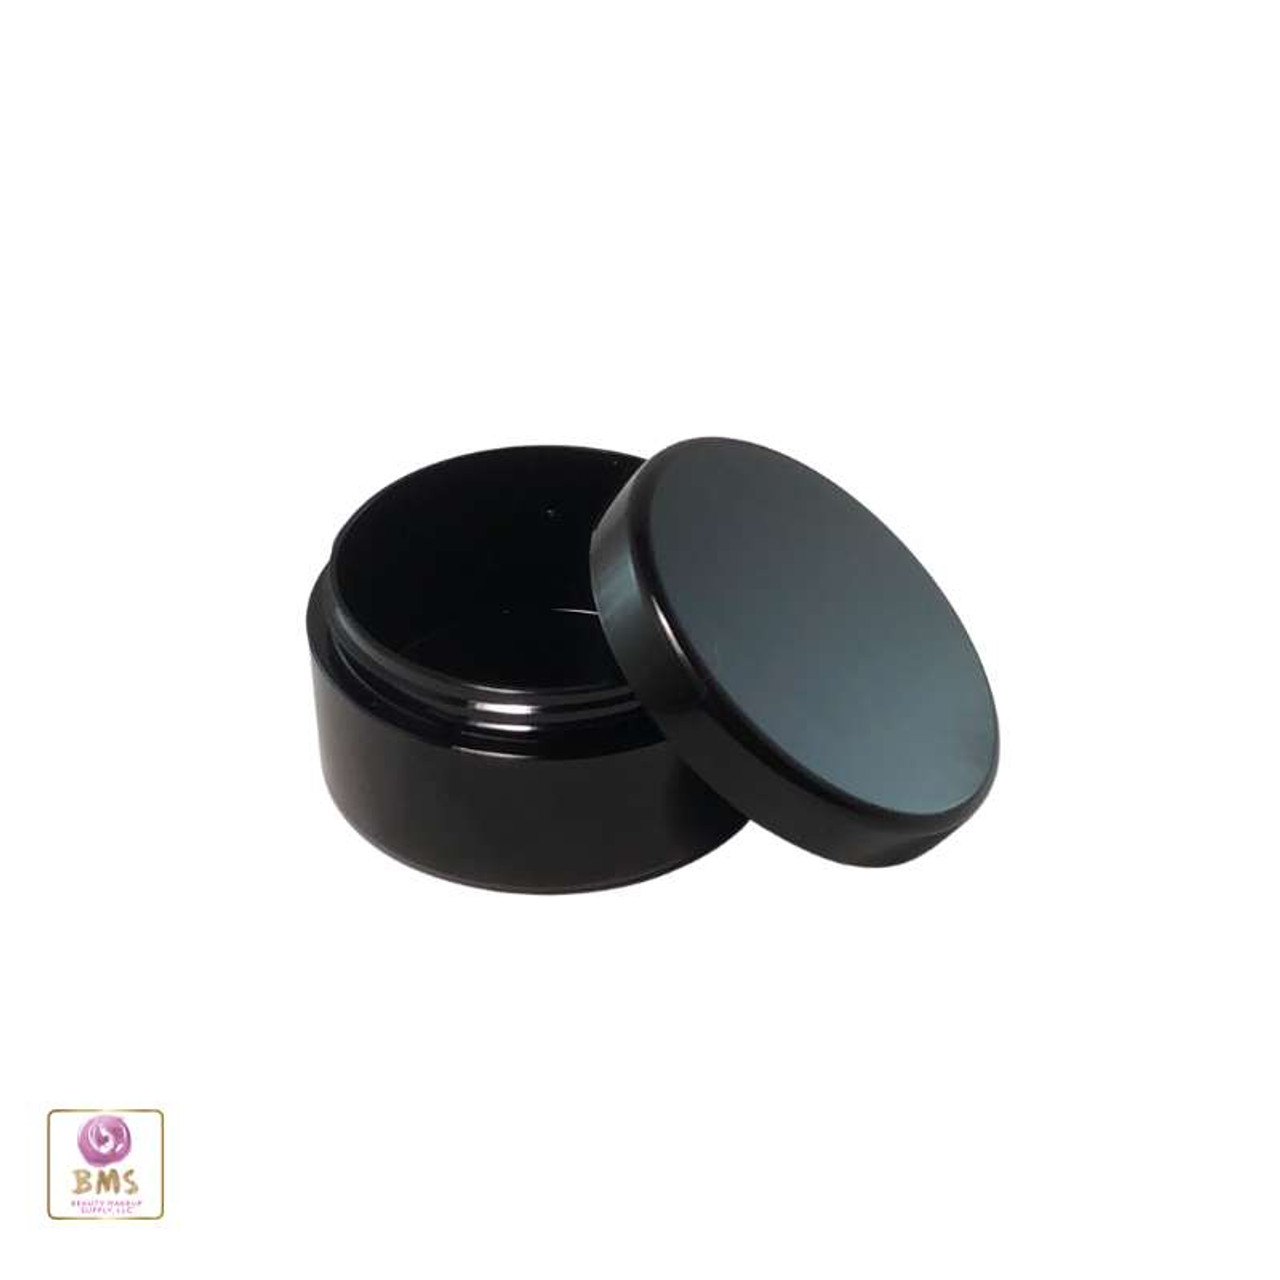 https://cdn11.bigcommerce.com/s-qd7k5gxi/images/stencil/1280x1280/products/498/7213/Cosmetic-Sifter-Jars-Plastic-Black-Beauty-Containers-with-Lids-30-Gram-Black-Clear-Lid-Beauty-Makeup-Supply_6089__70263.1661390997.jpg?c=2?imbypass=on